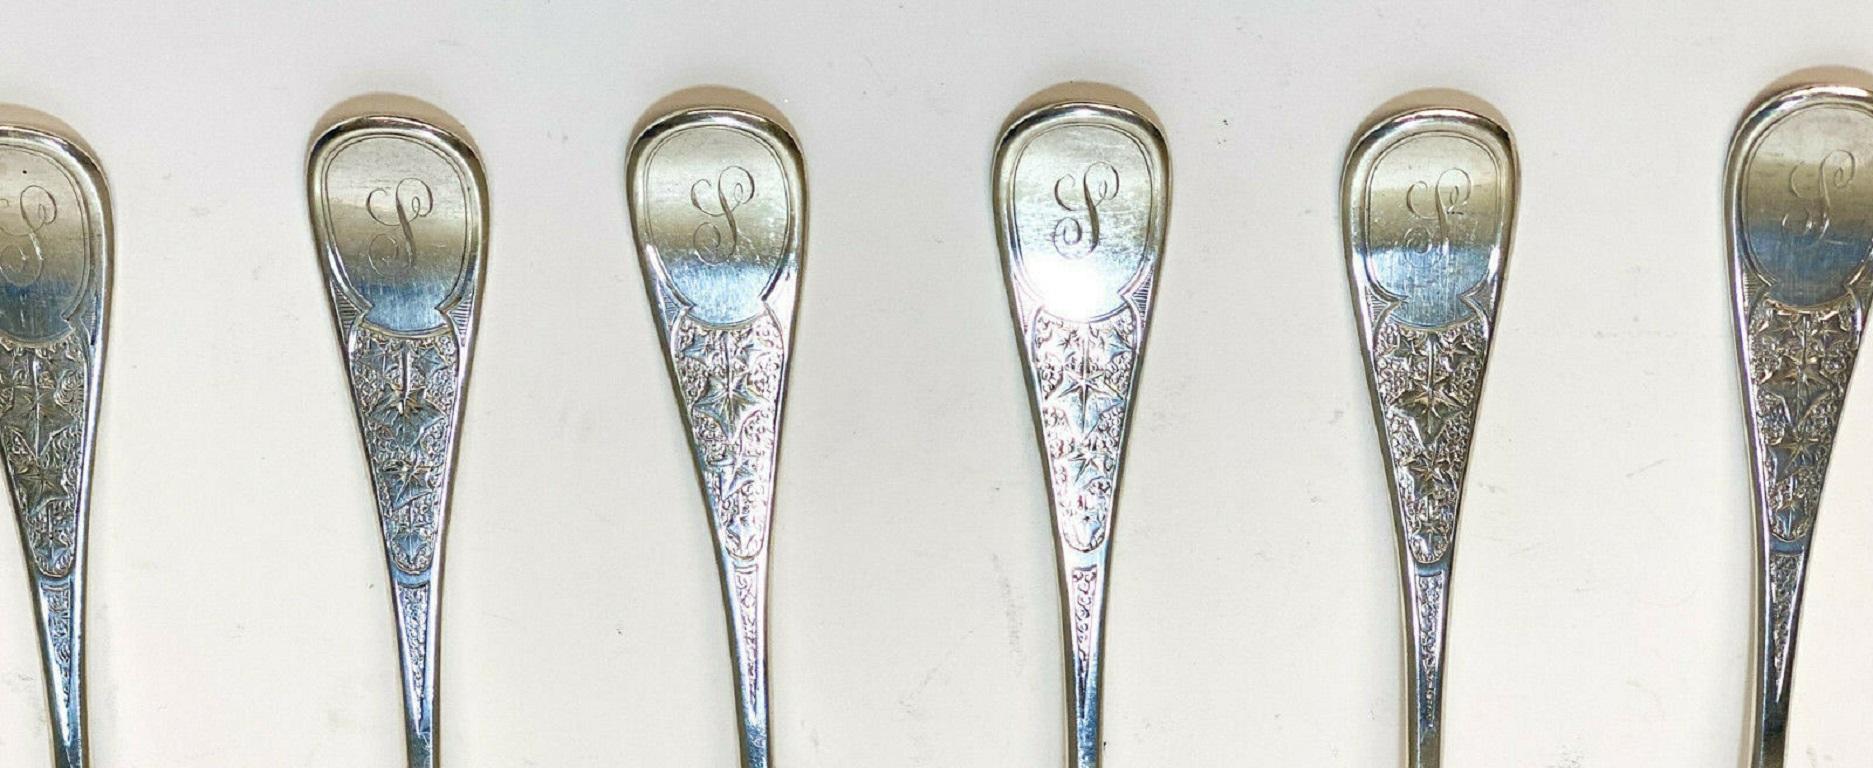 10 Tiffany & Co. Sterling Silver Tablespoons in Antique Ivy, Monogram 